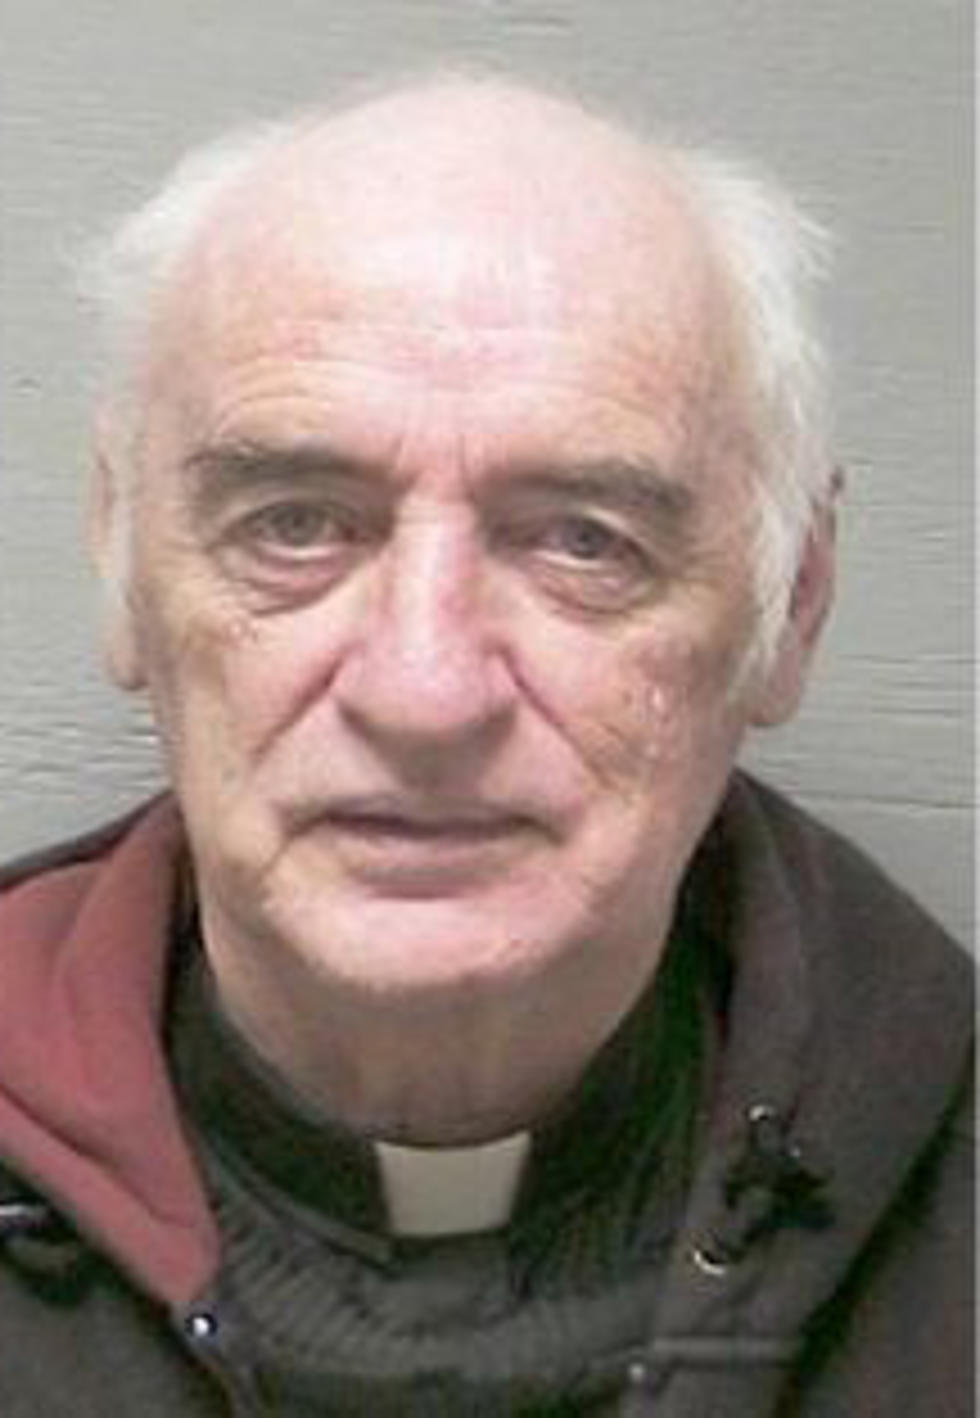 Priest Led Police On Car Chase